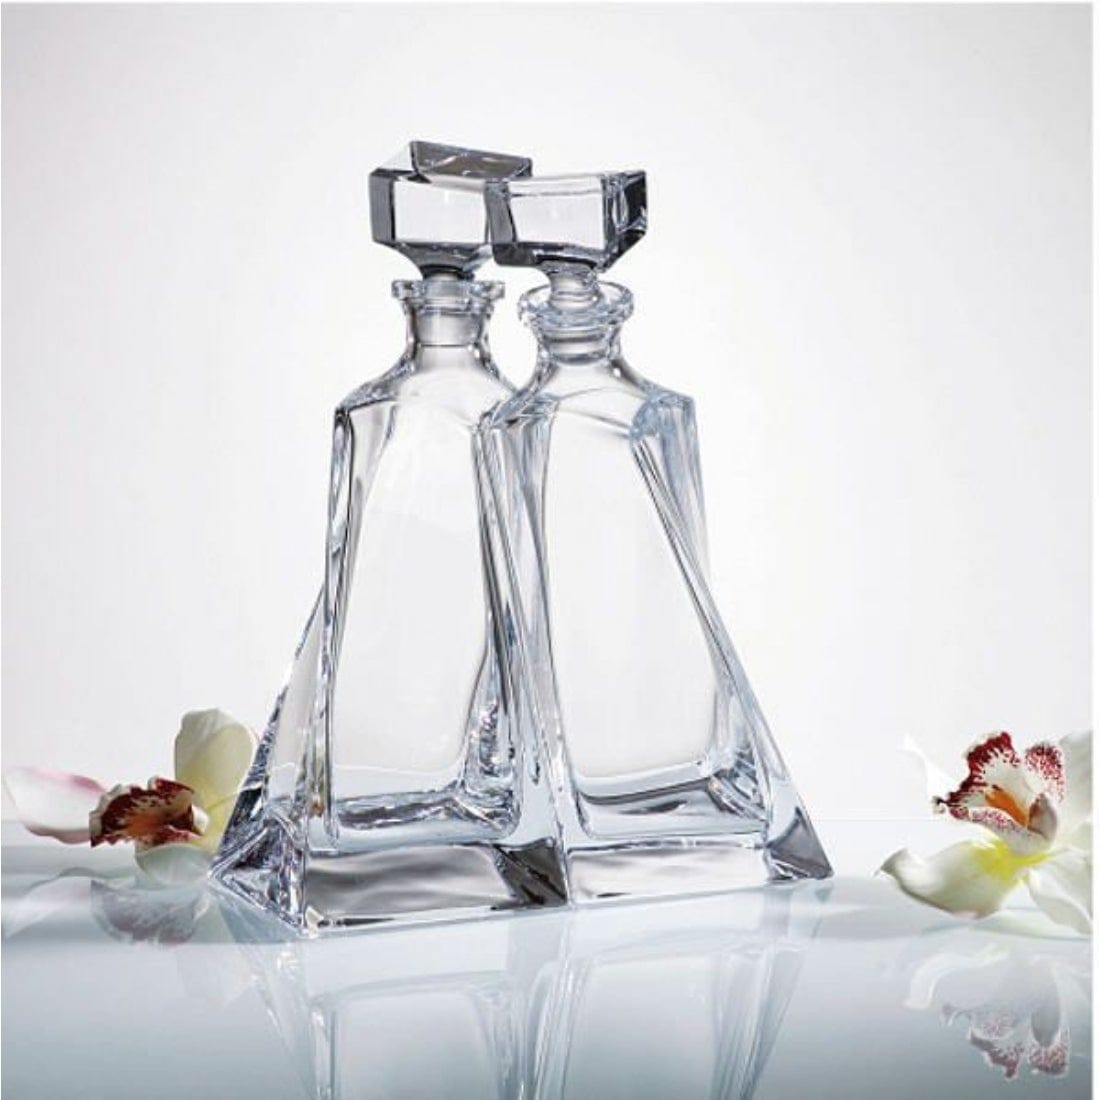 http://ihouzit.com/cdn/shop/products/crystalex-decanters-lovers-decanter-set-two-decanters-bohemian-lead-free-crystal-glass-whiskey-or-brandy-carafes-with-glass-stoppers-tng-jih53u1-tng-jih53u1-30017396998300.jpg?v=1644380828